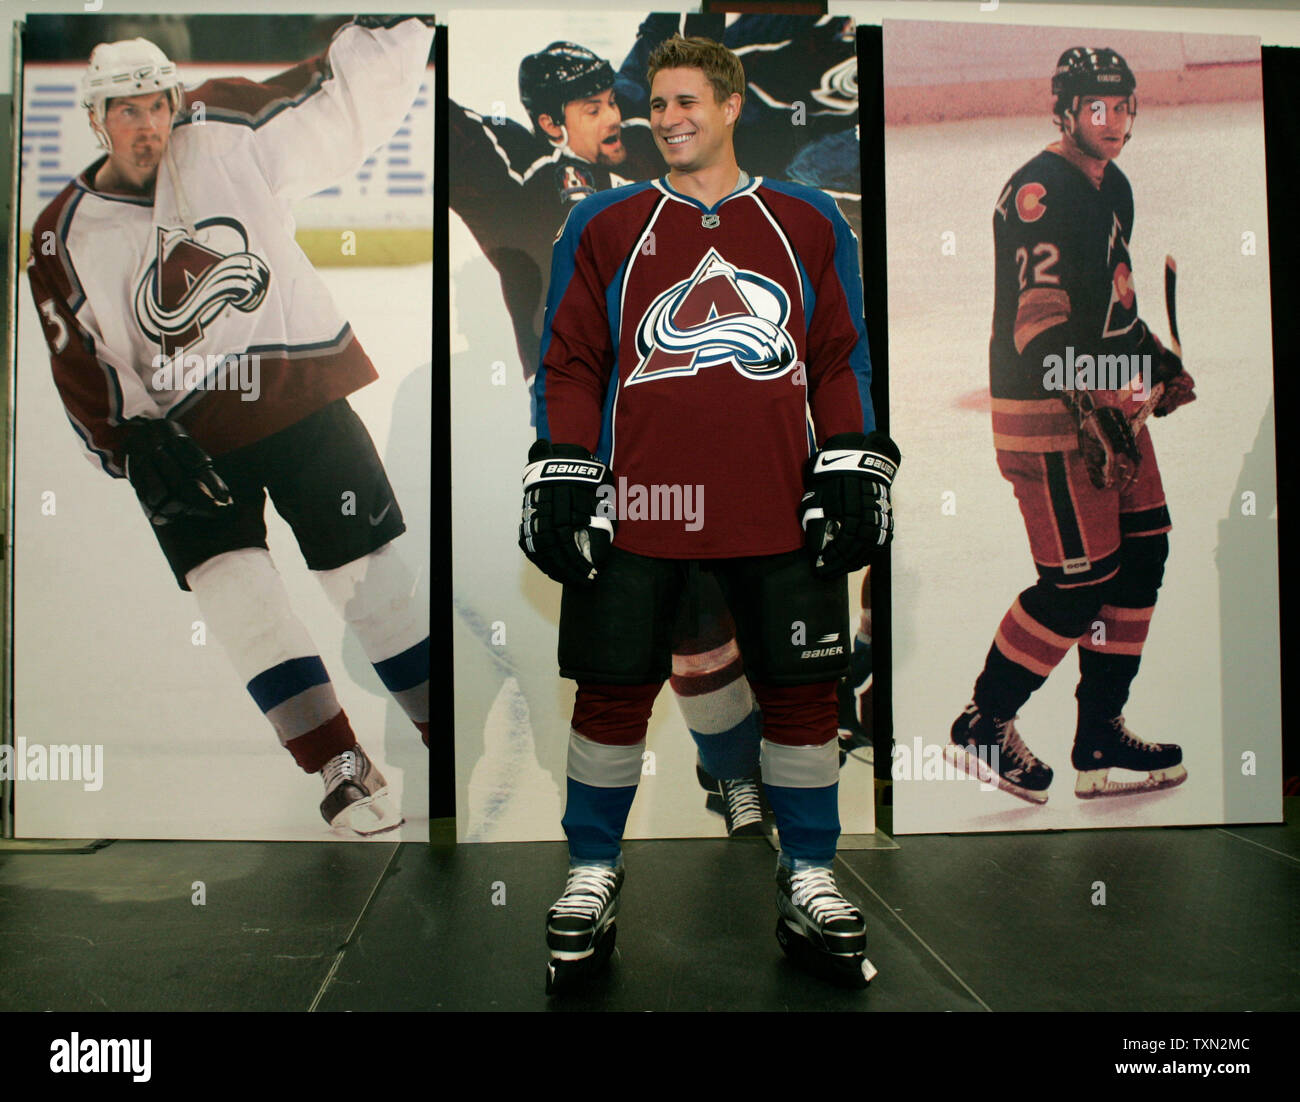 Colorado Avalanche Defenseman John Michael Liles Models The New Avalanche Reebok Designed Uniform Against The Background Of Past Uniforms During A Press Conference At The Pepsi Center In Denver On September 12 2007